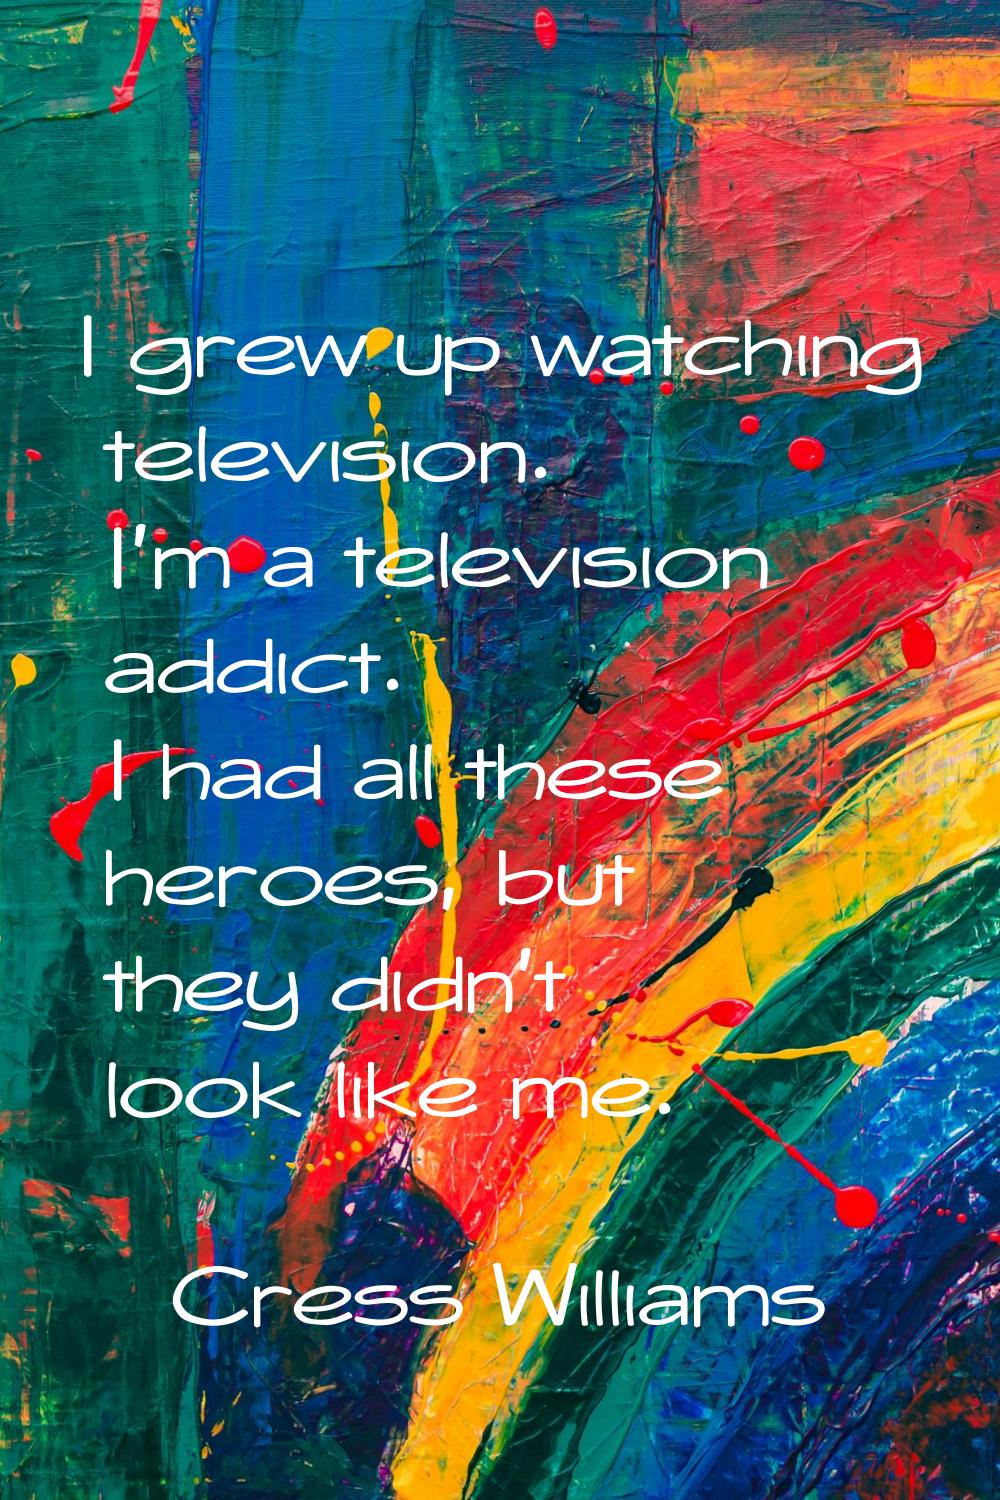 I grew up watching television. I'm a television addict. I had all these heroes, but they didn't loo